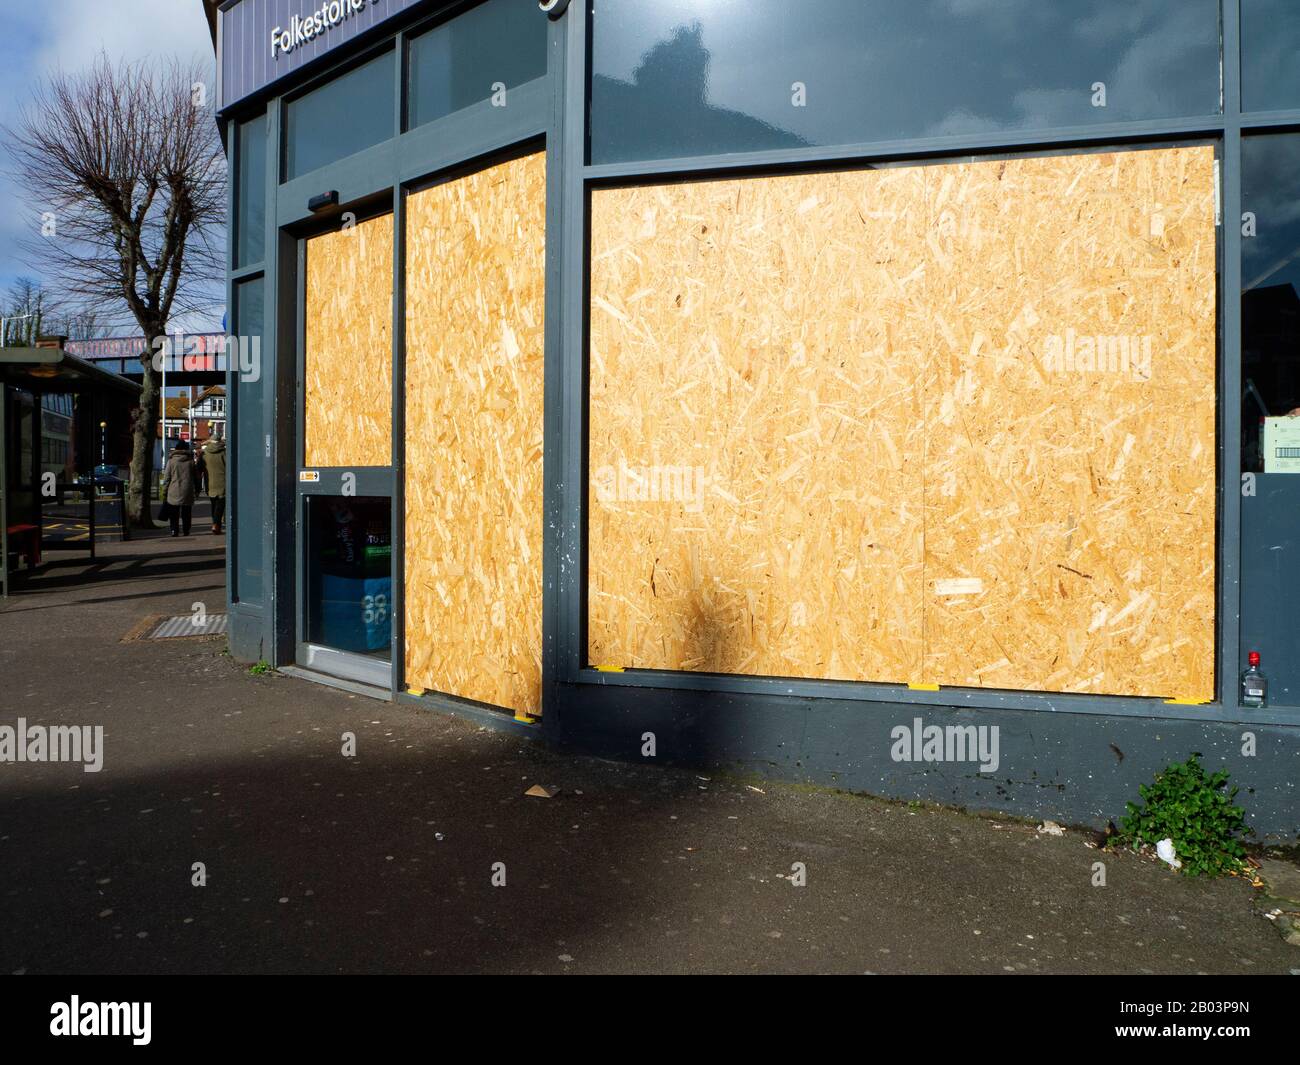 Boarded up shop front in high street Stock Photo